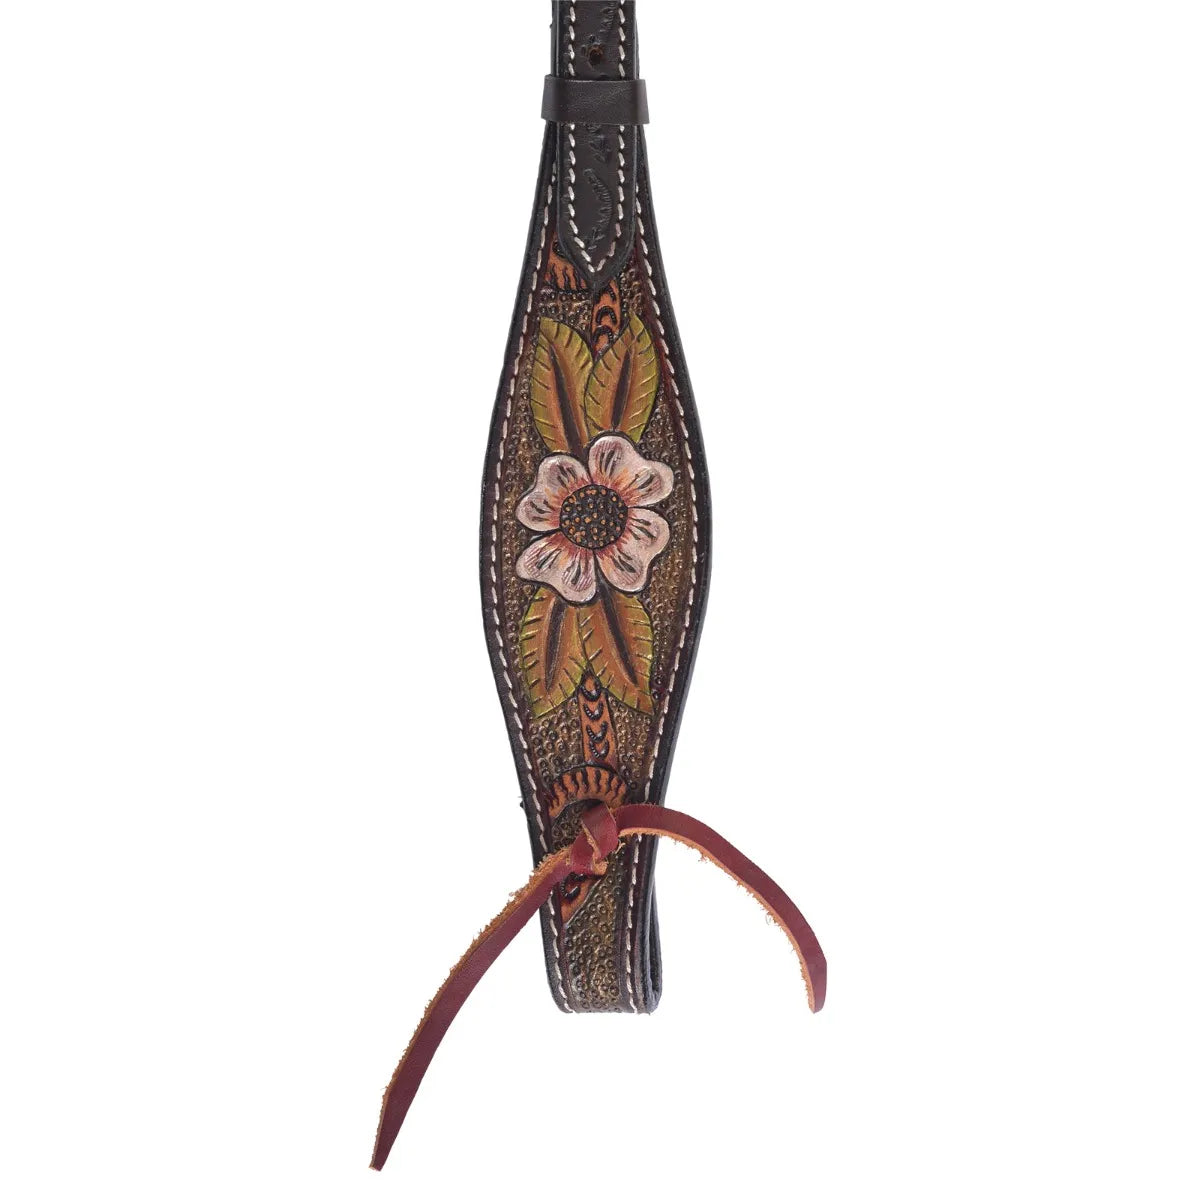 Circle Y Dogwood Flower Browband Headstall